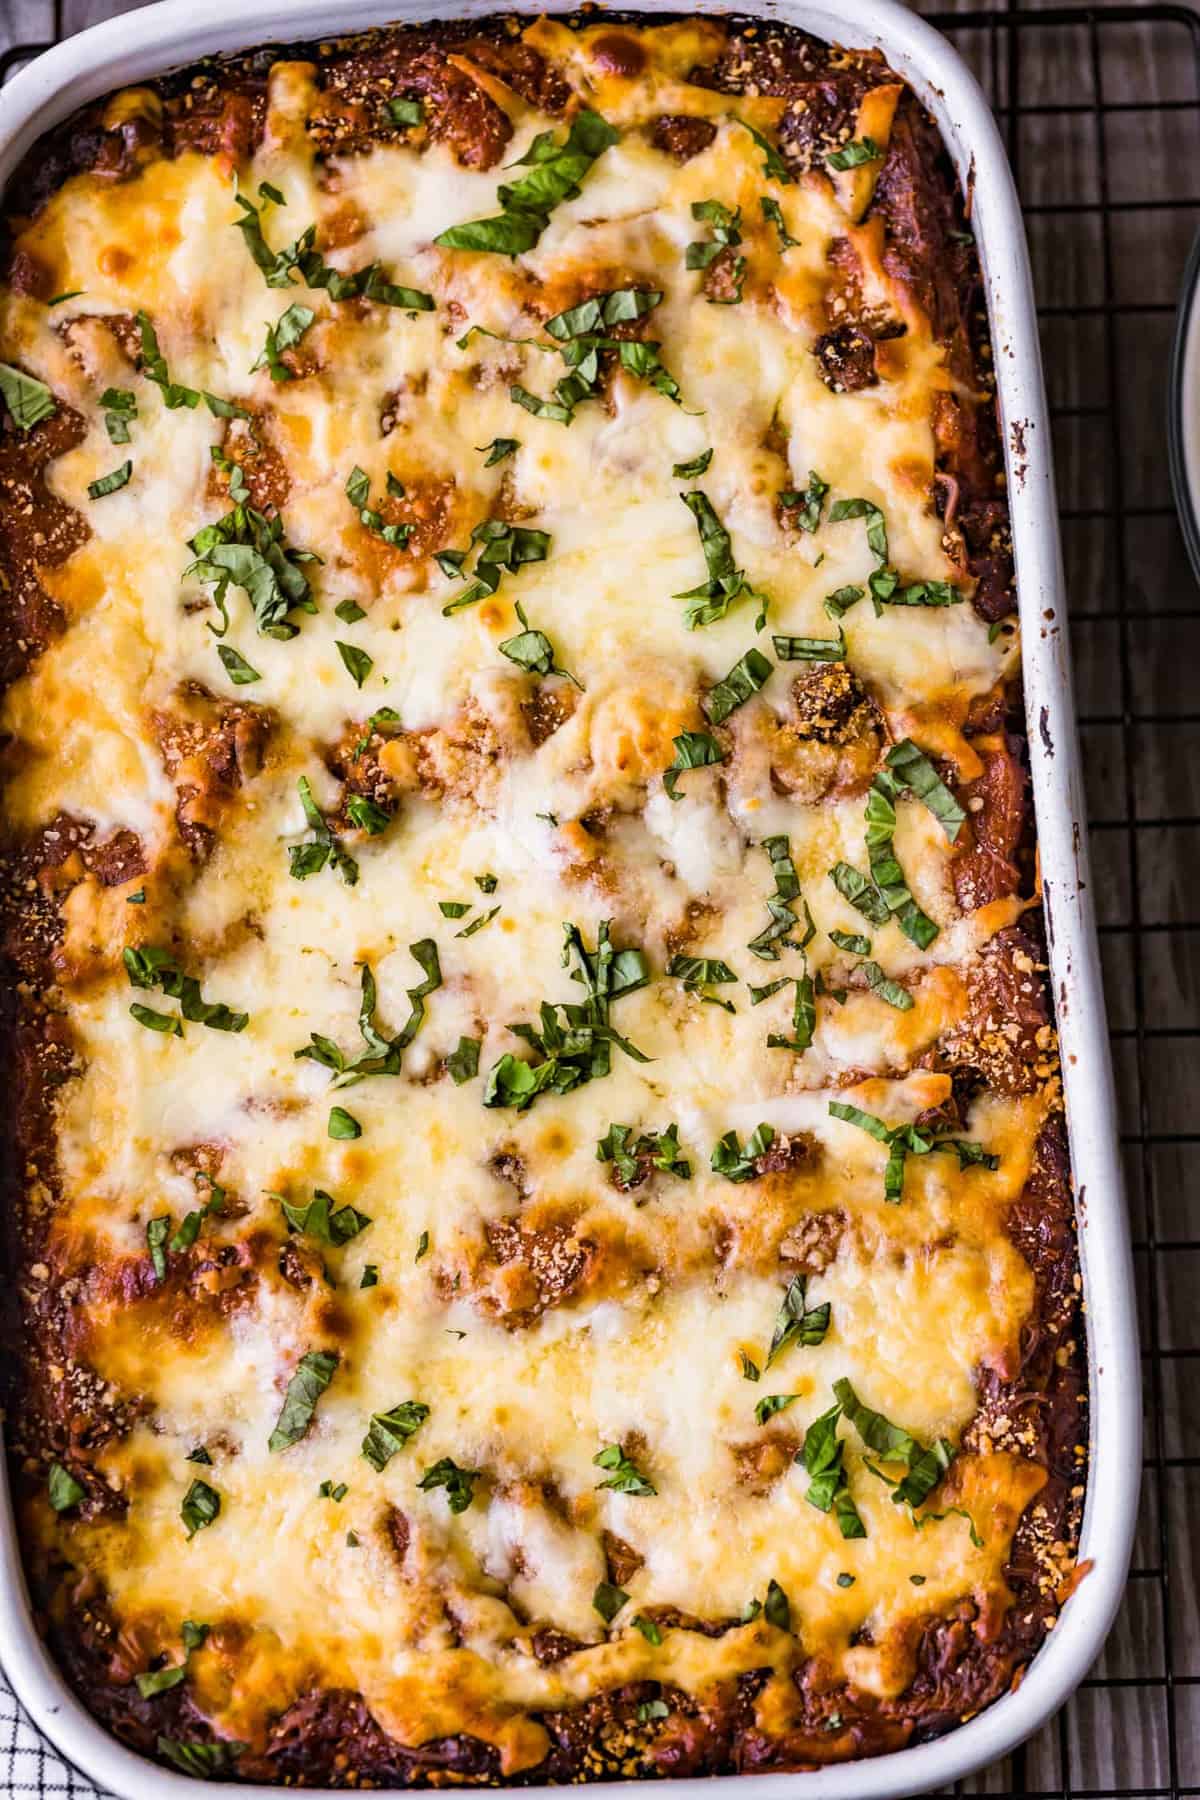 Top shot of a baked Lasagna with Meat Sauce